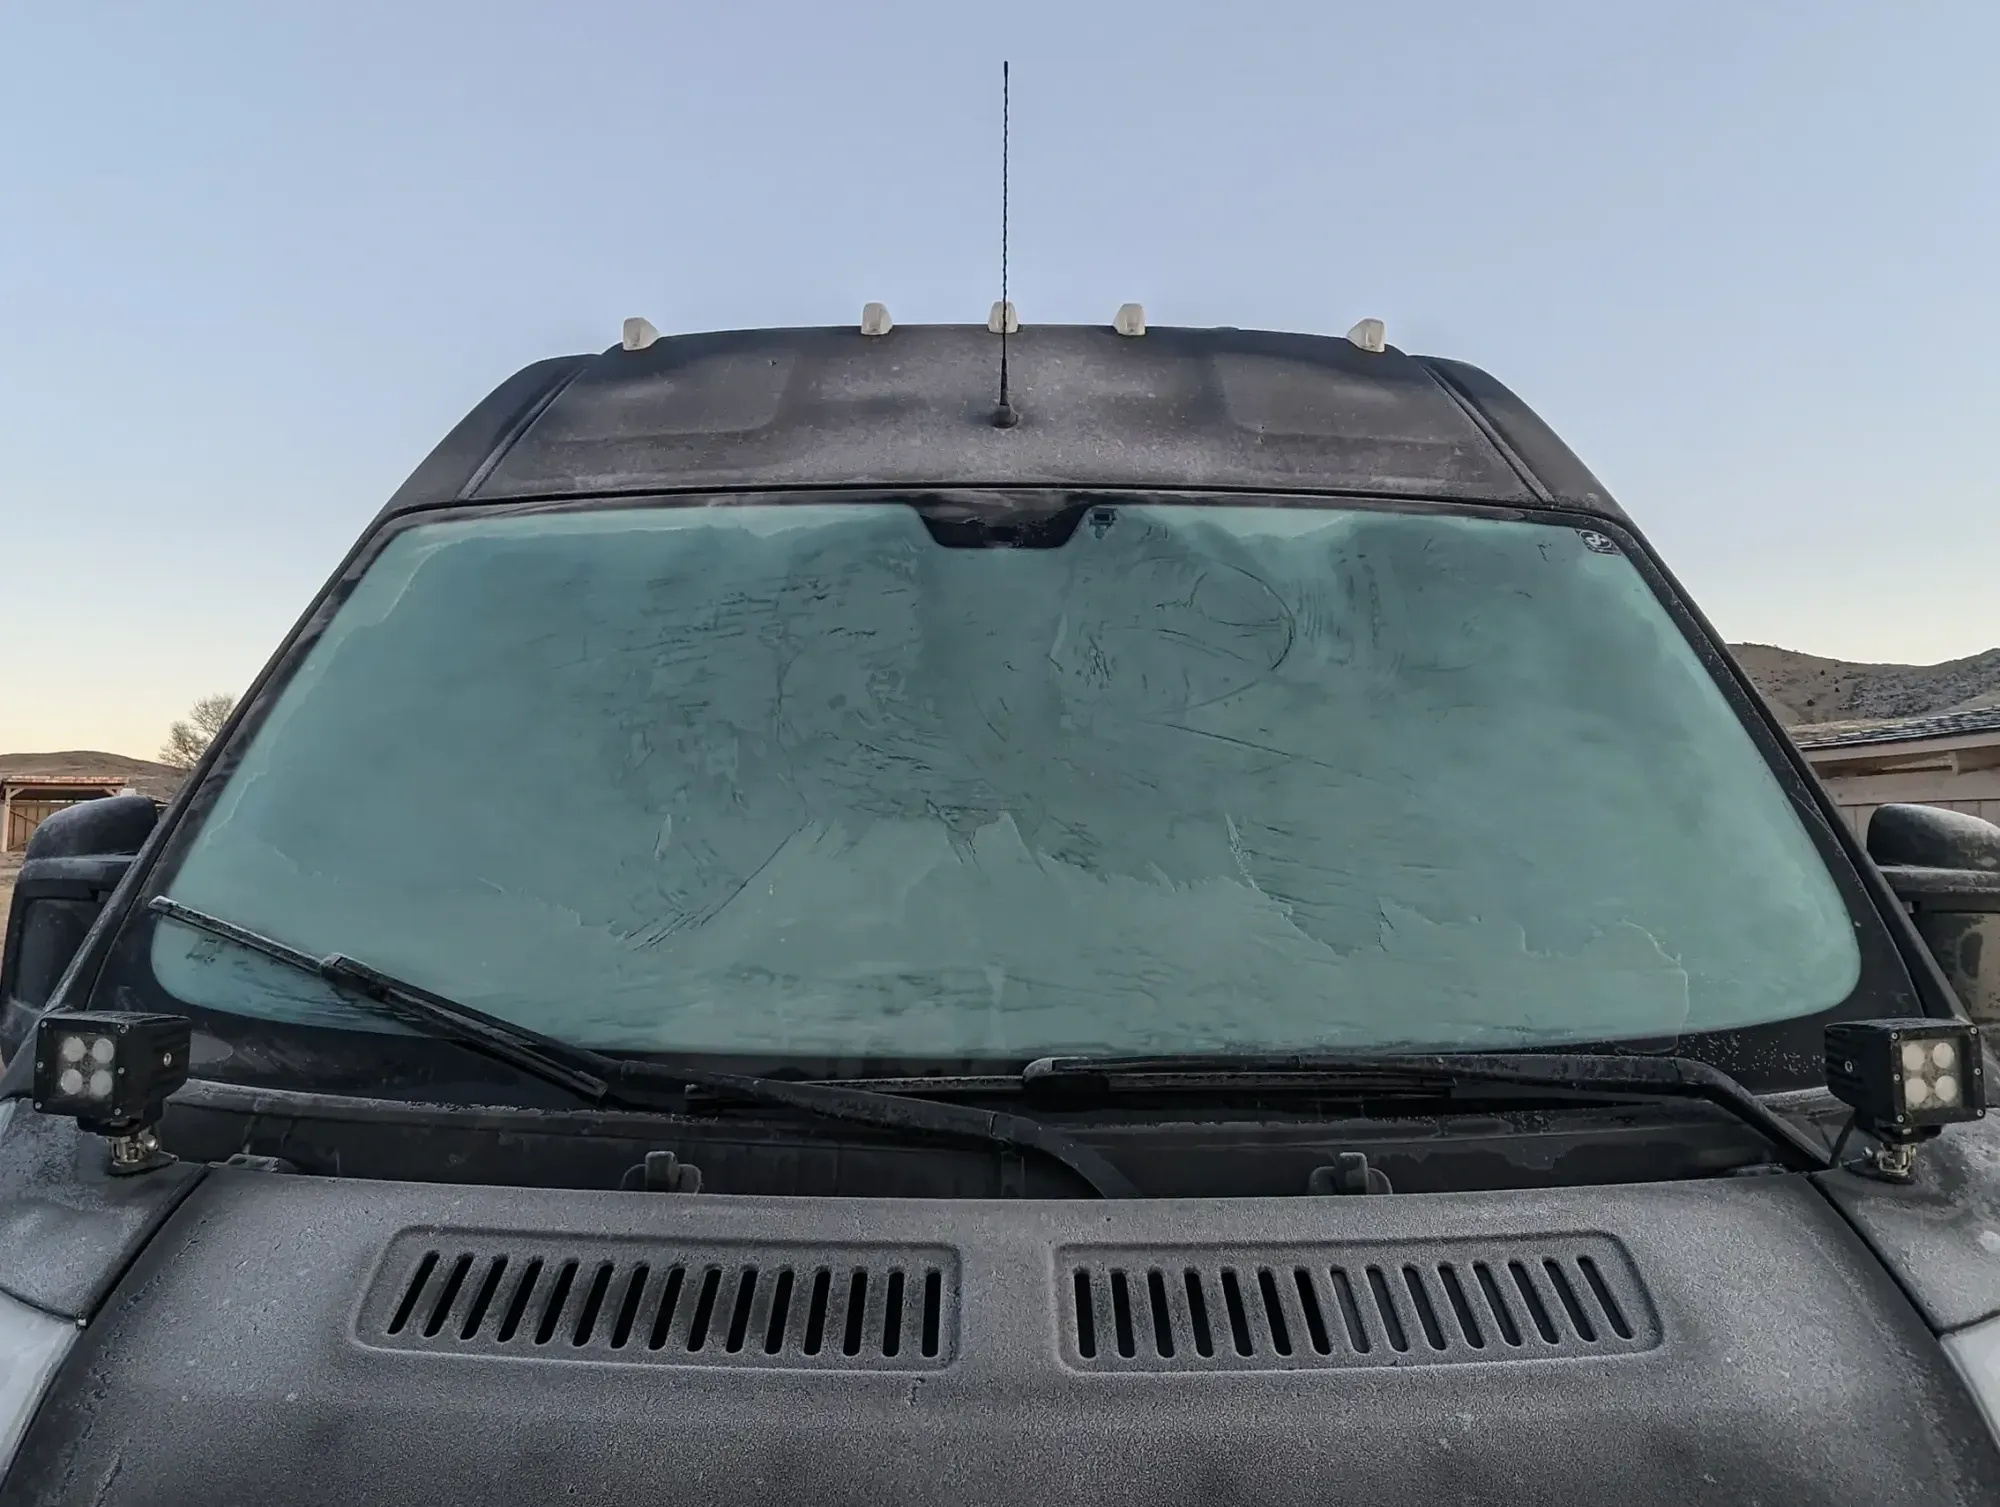 Can You Live In A Van In The Winter? Tips and Strategies for Winter Van Life.